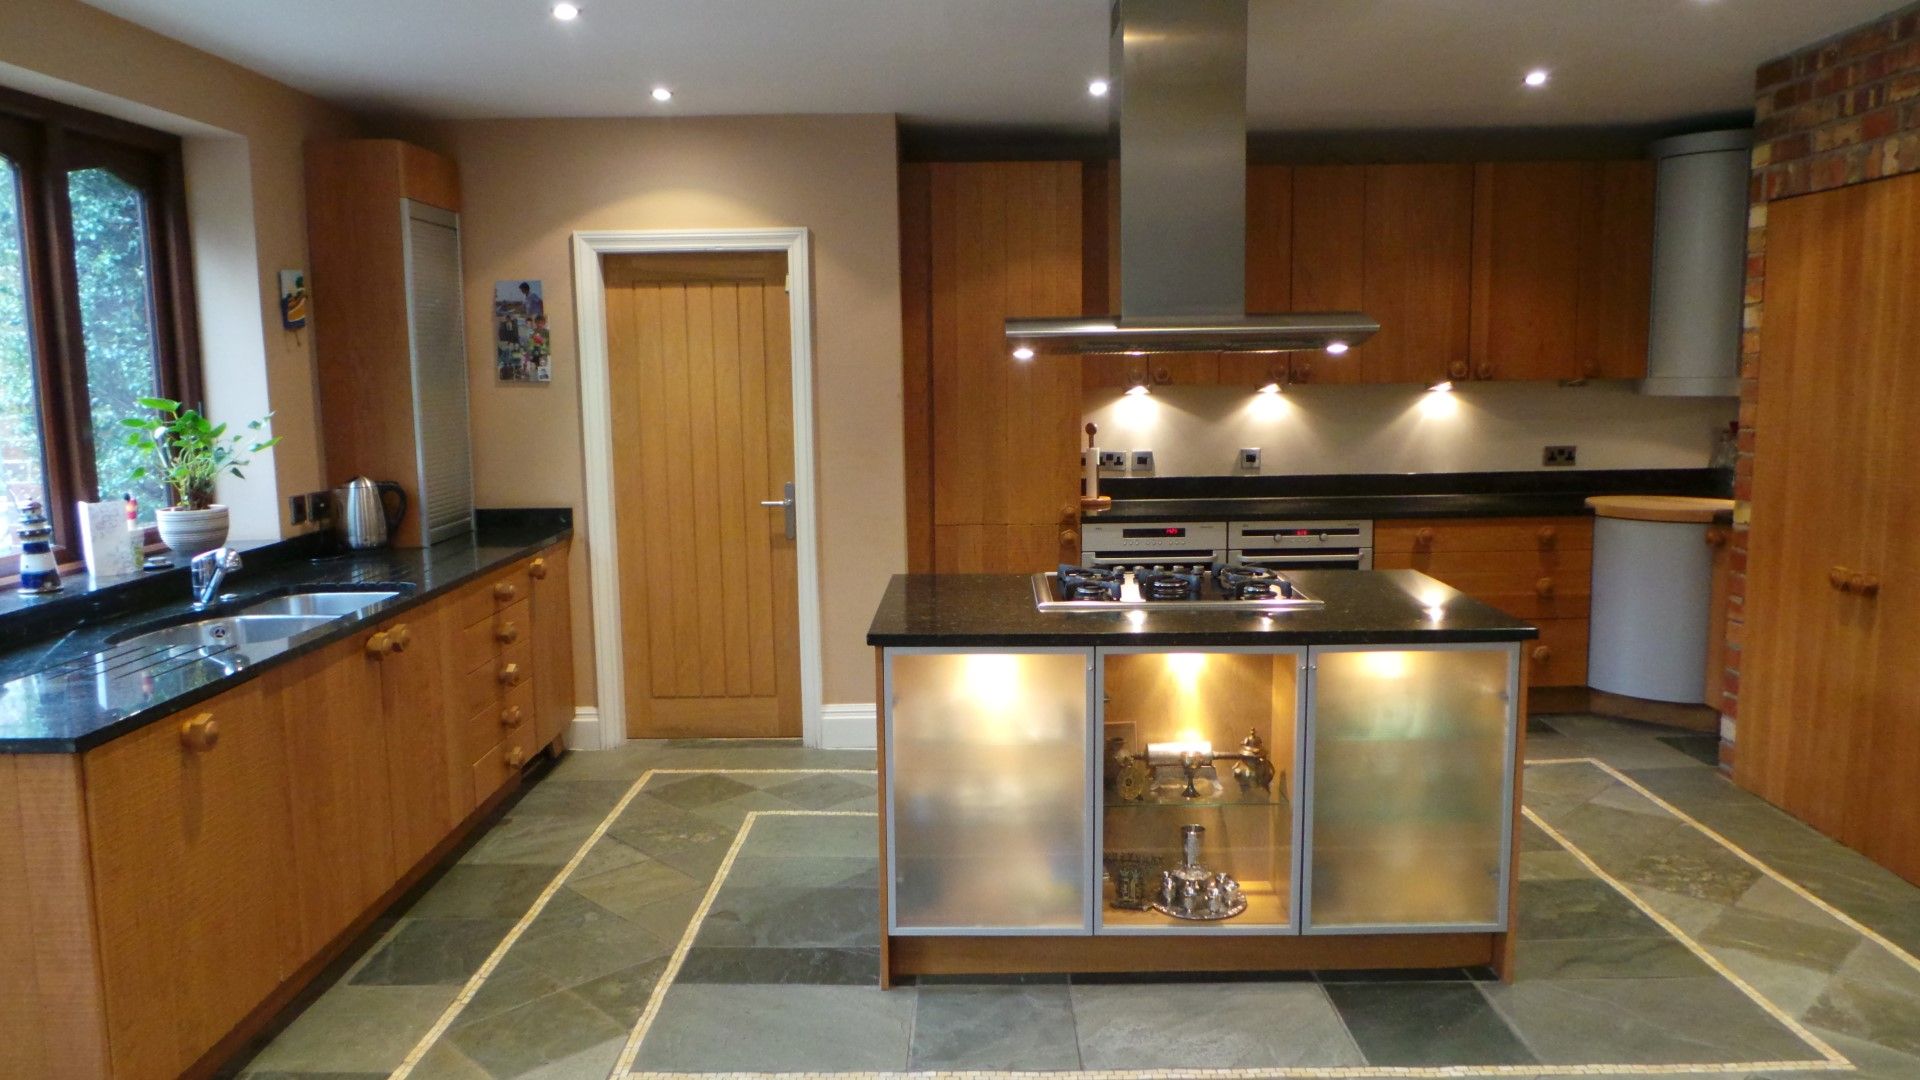 1 x Beautifully Crafted Bespoke Johnson & Johnson Fitted Kitchen - Rustic Solid Oak Doors, Modern - Image 17 of 86